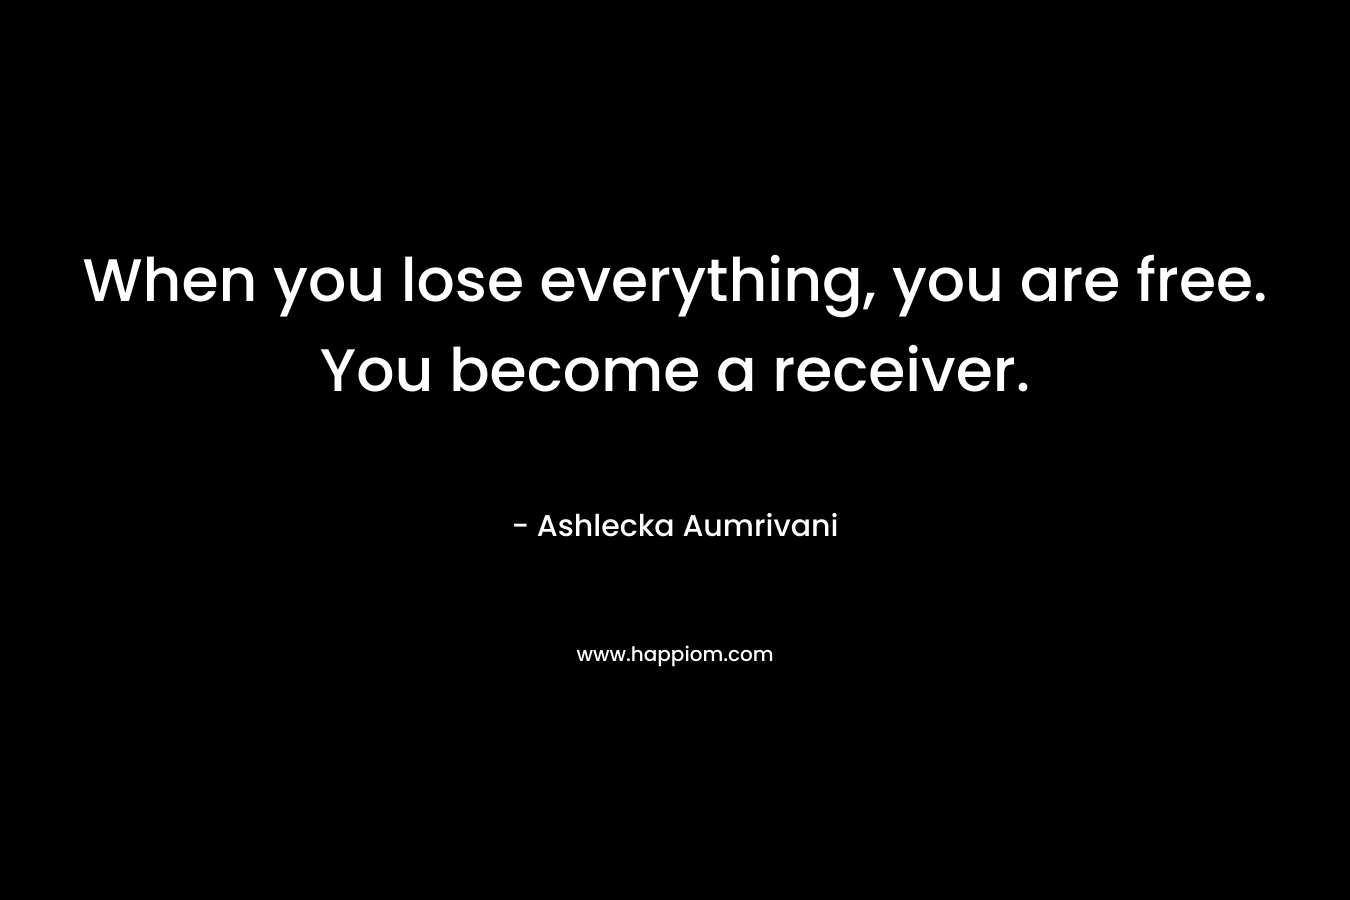 When you lose everything, you are free. You become a receiver. – Ashlecka Aumrivani